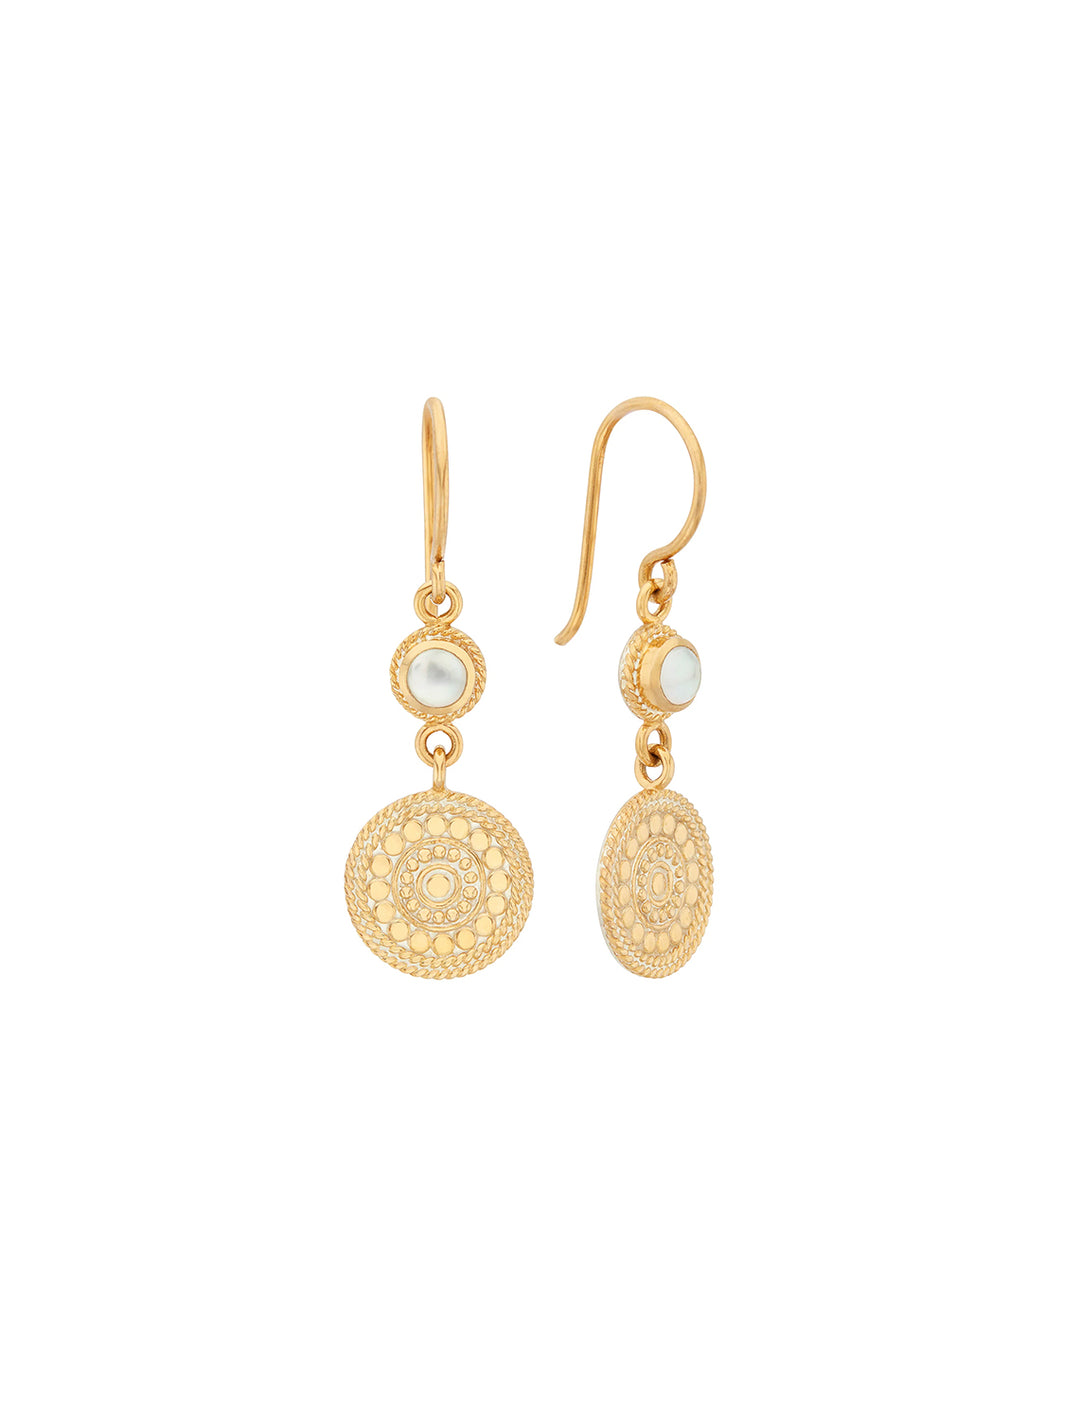 Front view of Anna Beck's mother of pearl and disc drop earrings in gold.